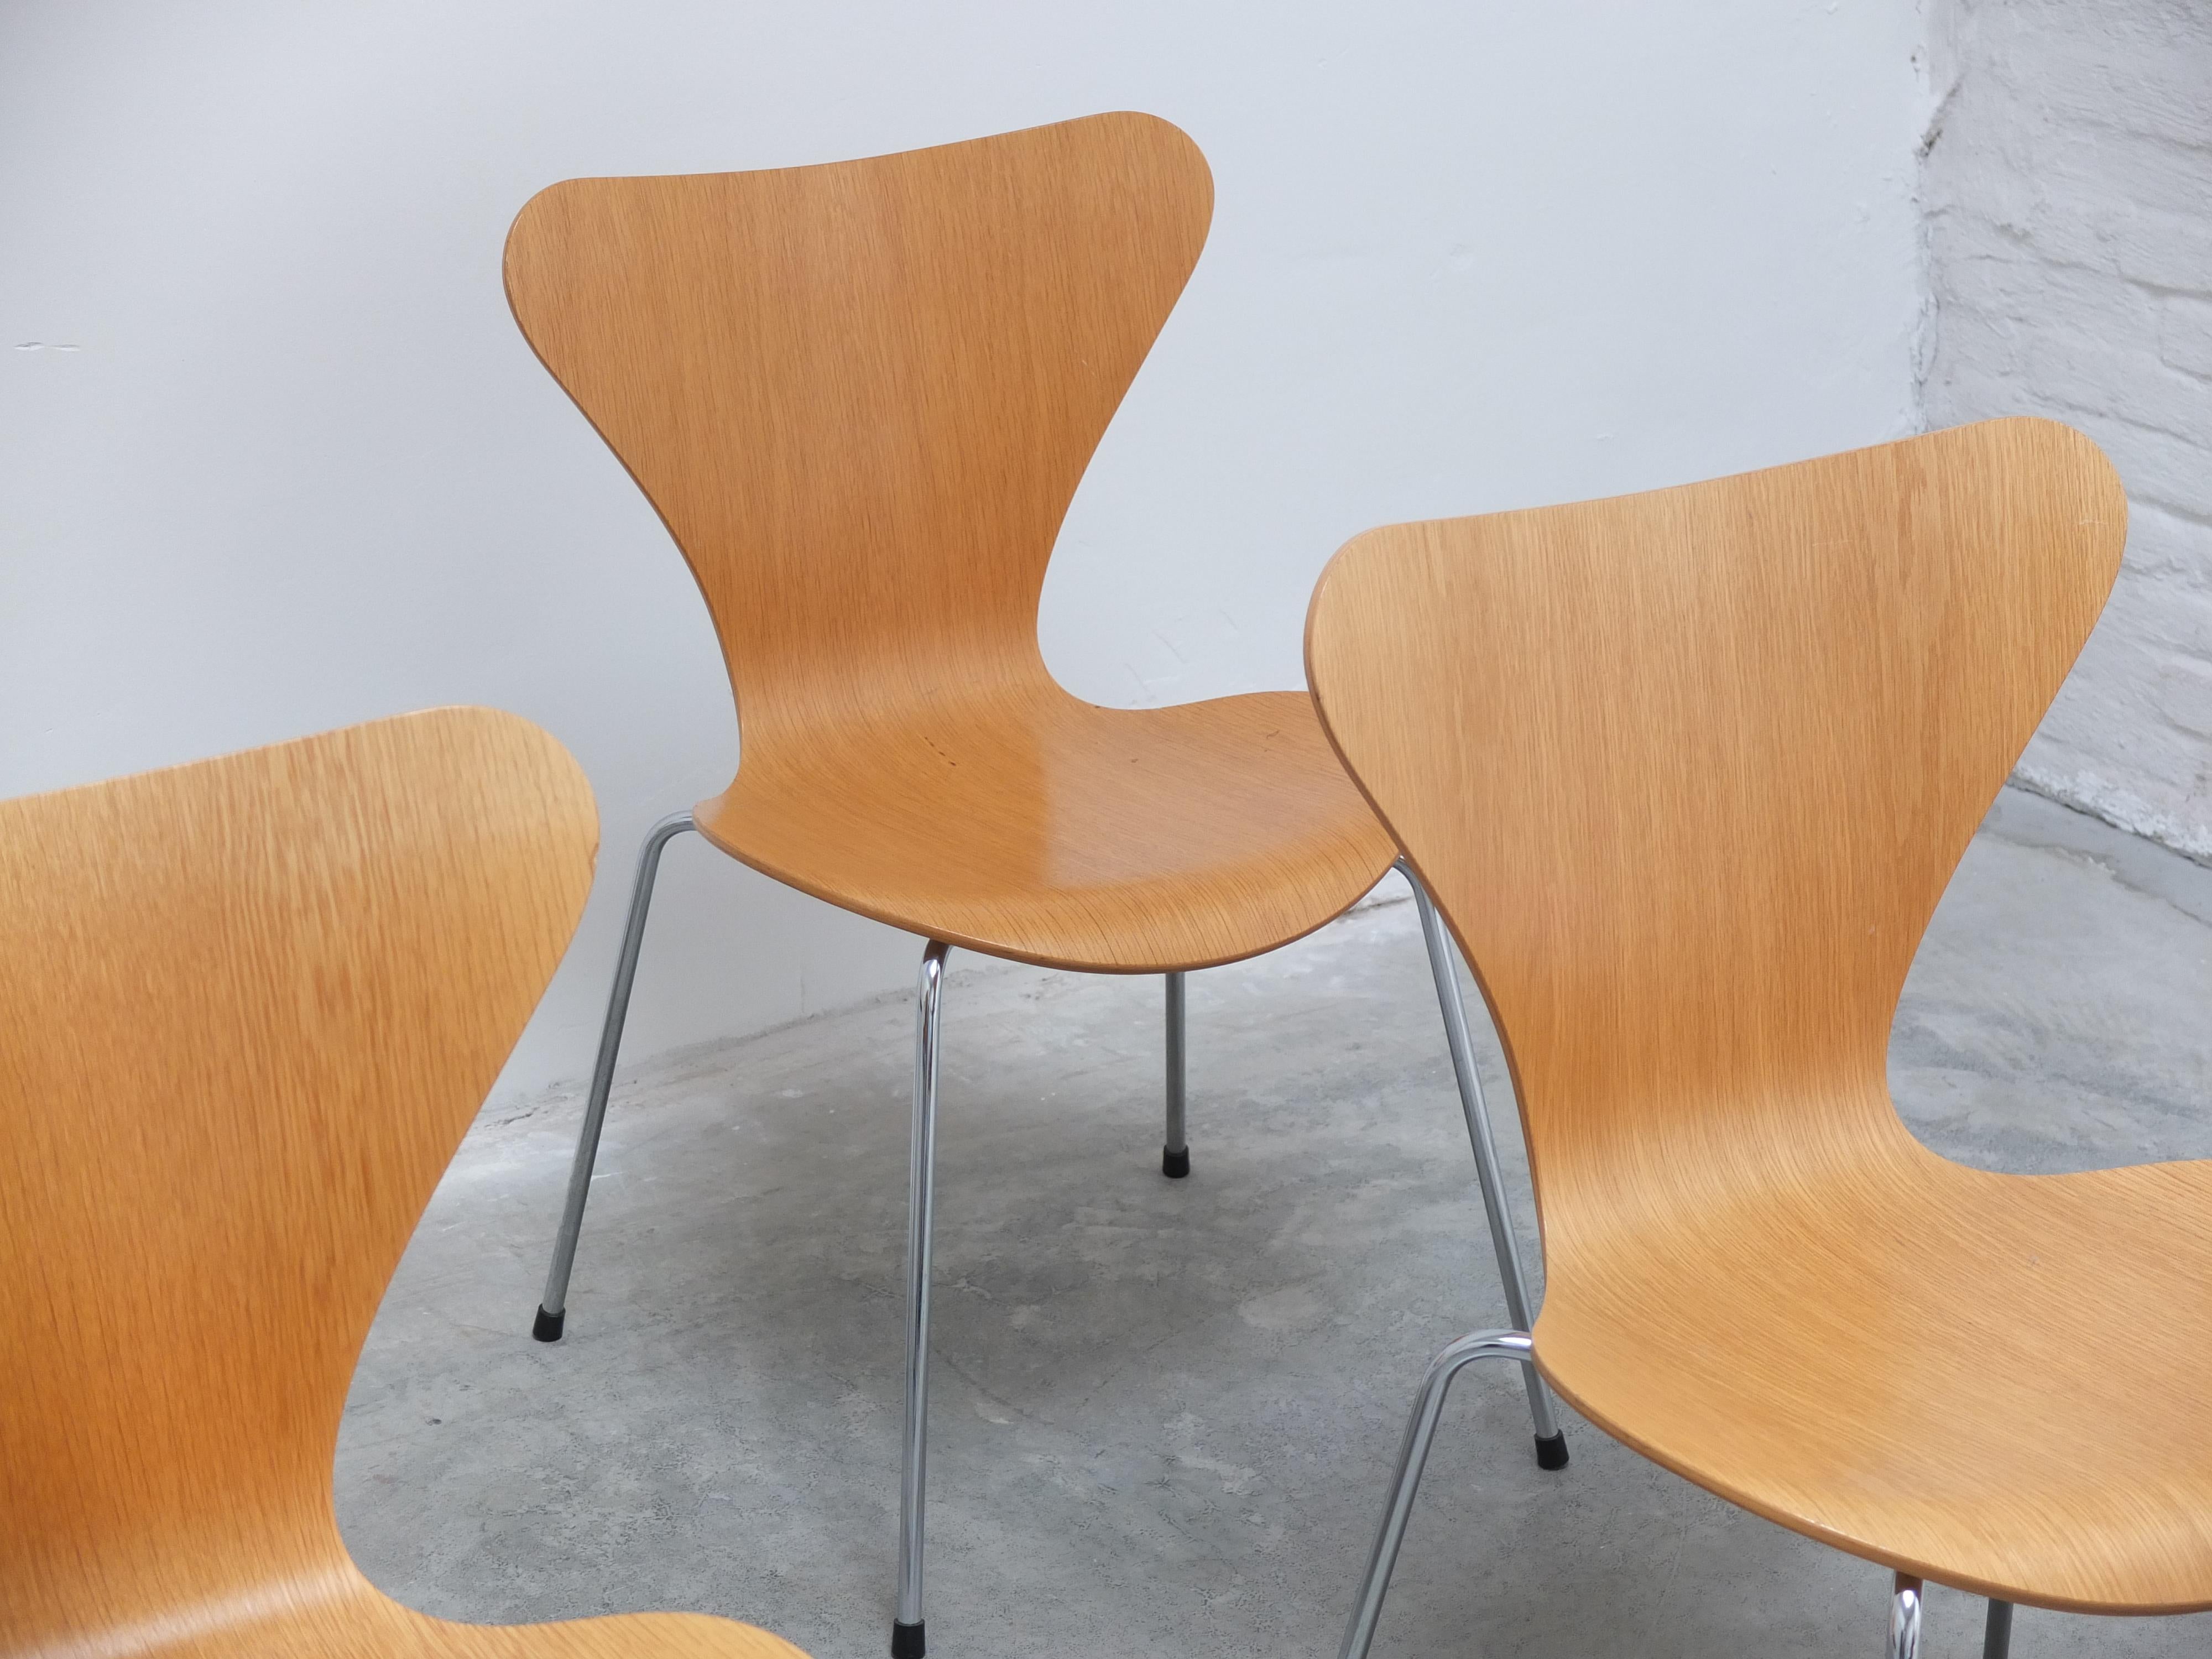 20th Century Set of 6 'Series 7' Chairs in Oak by Arne Jacobsen for Fritz Hansen, 1955